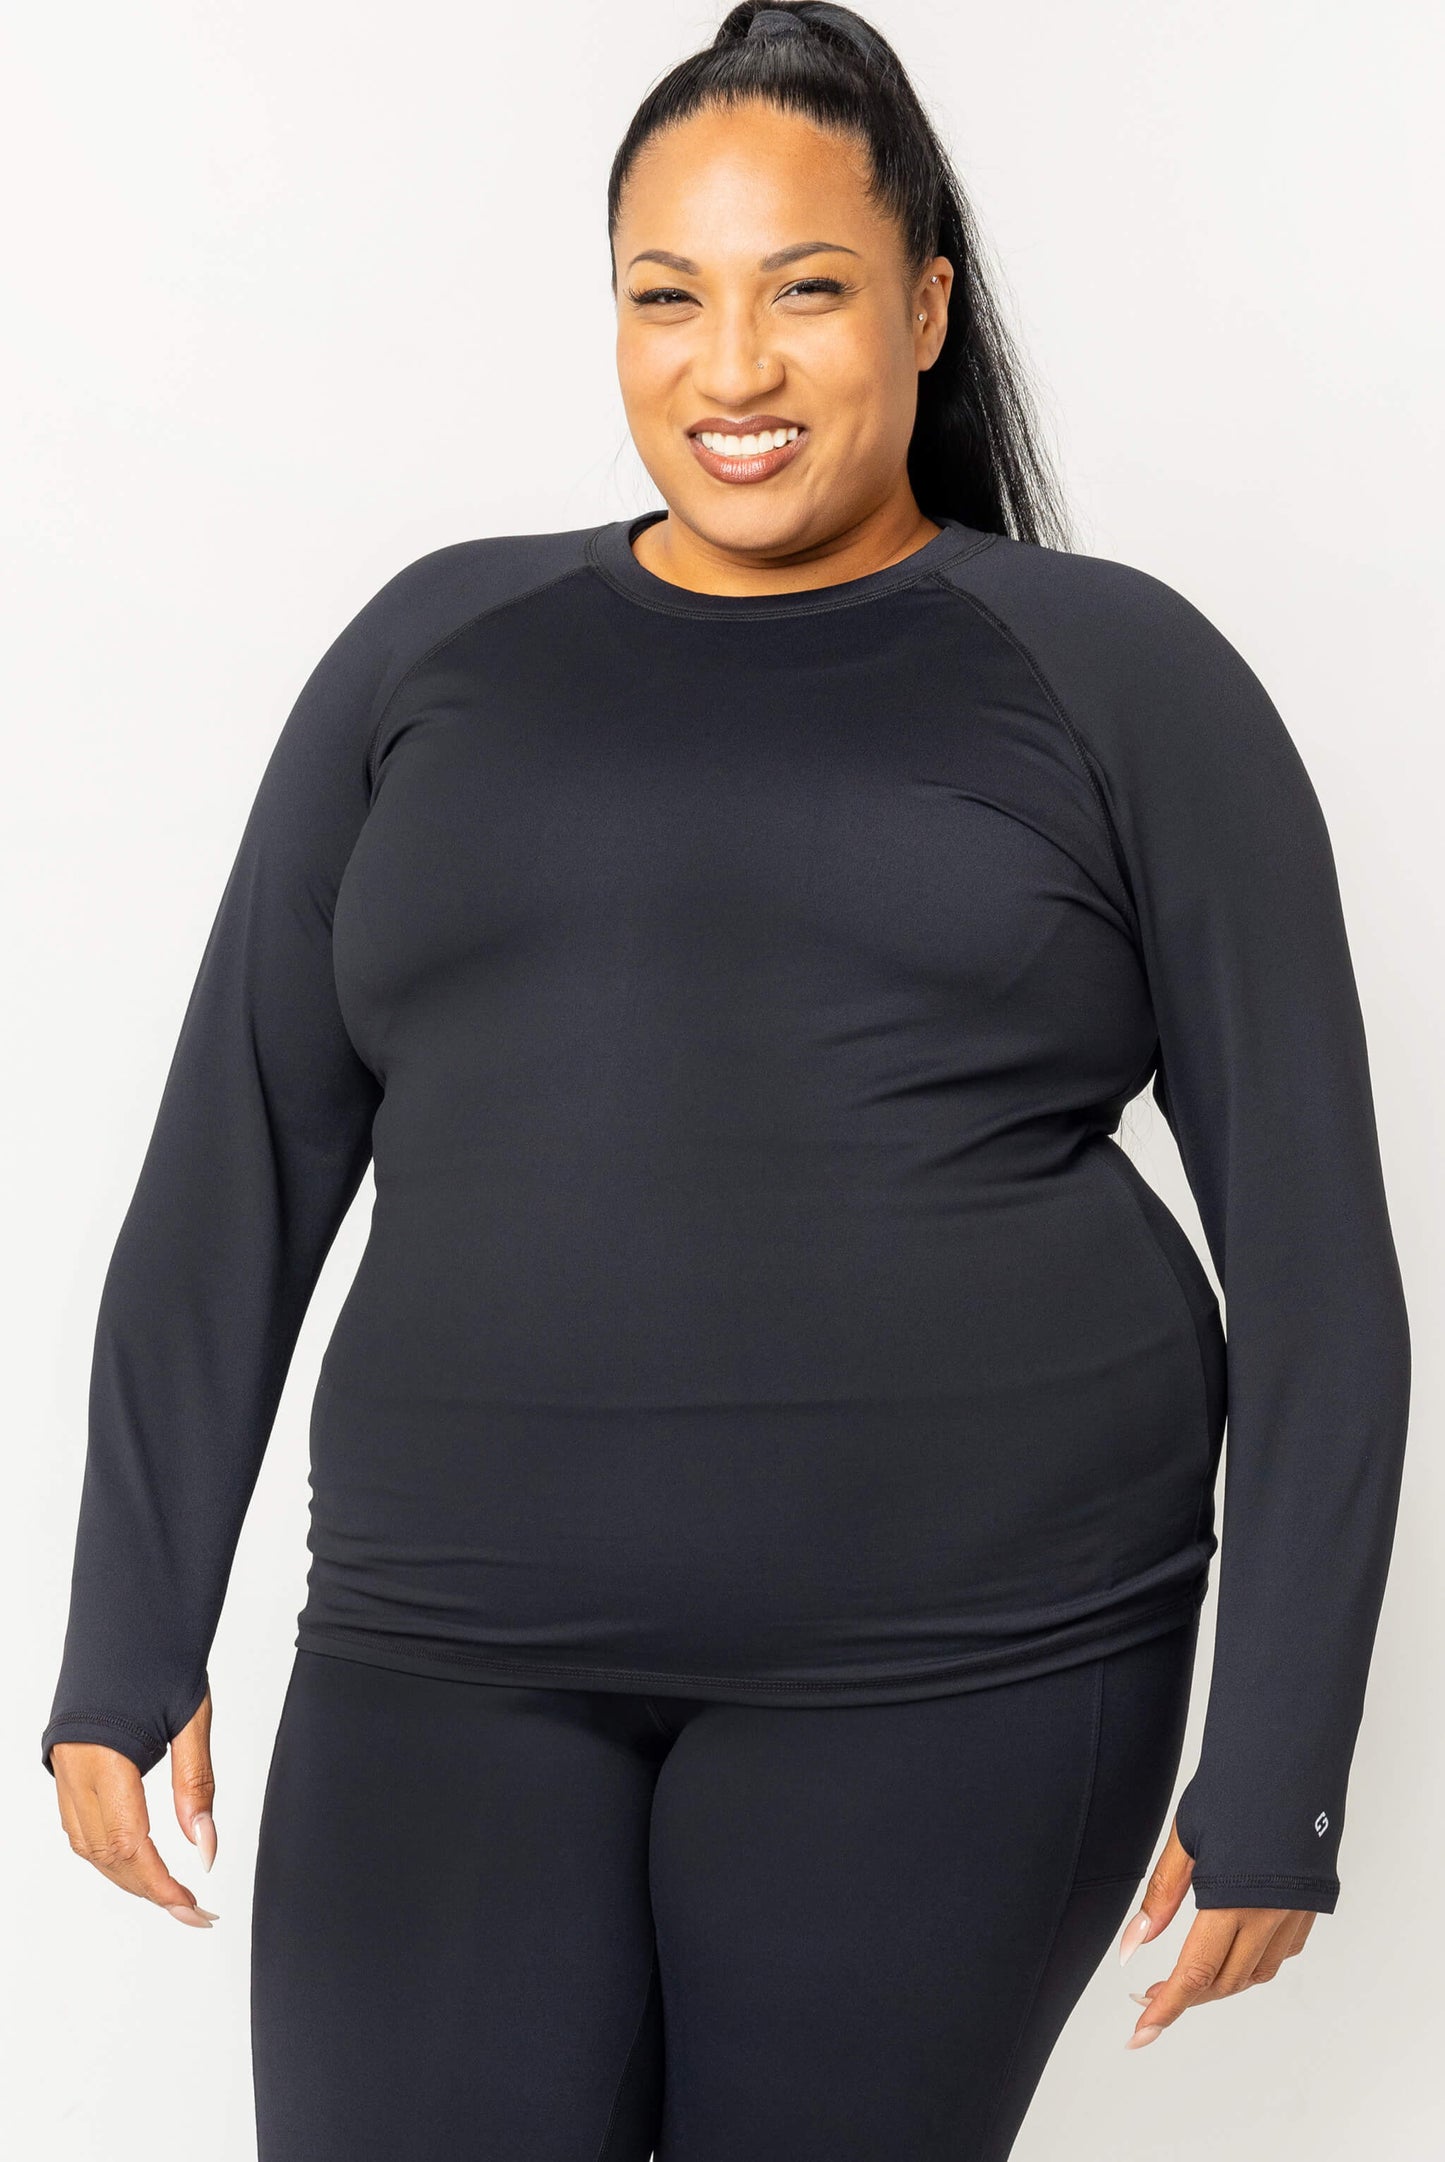 Long Sleeve Compression top